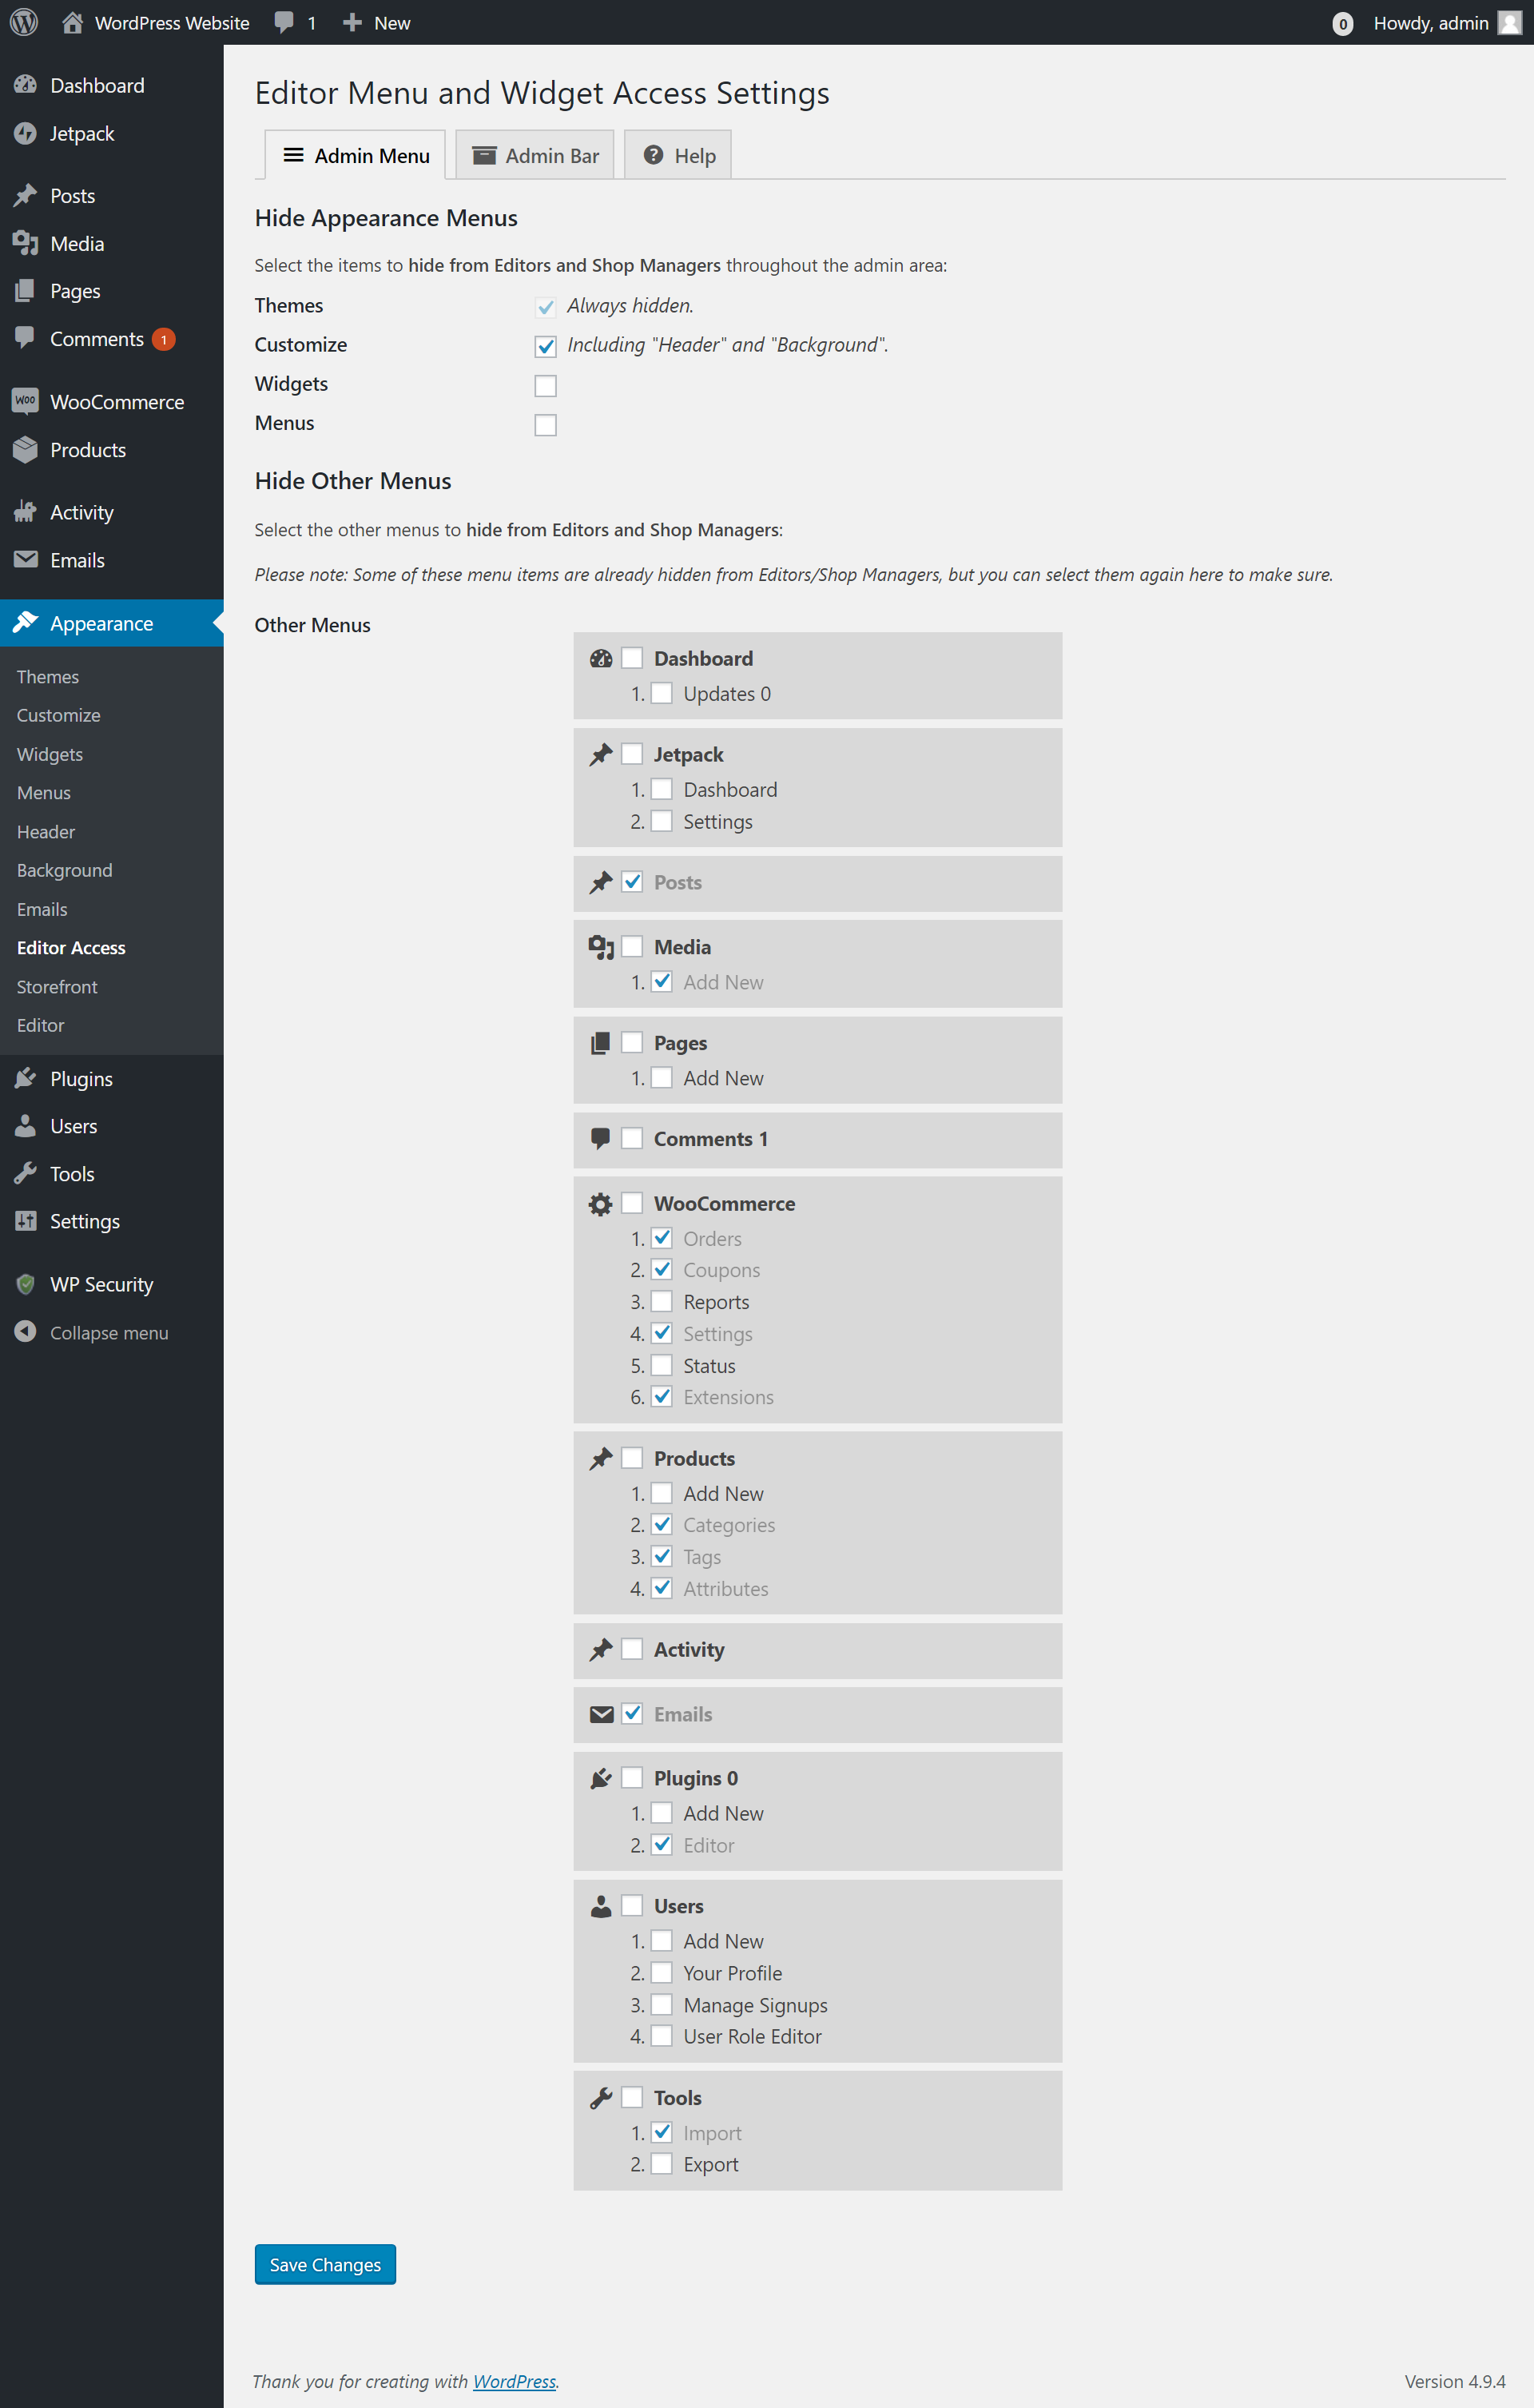 The new options page to control exactly what Editors and Shop Managers can access.